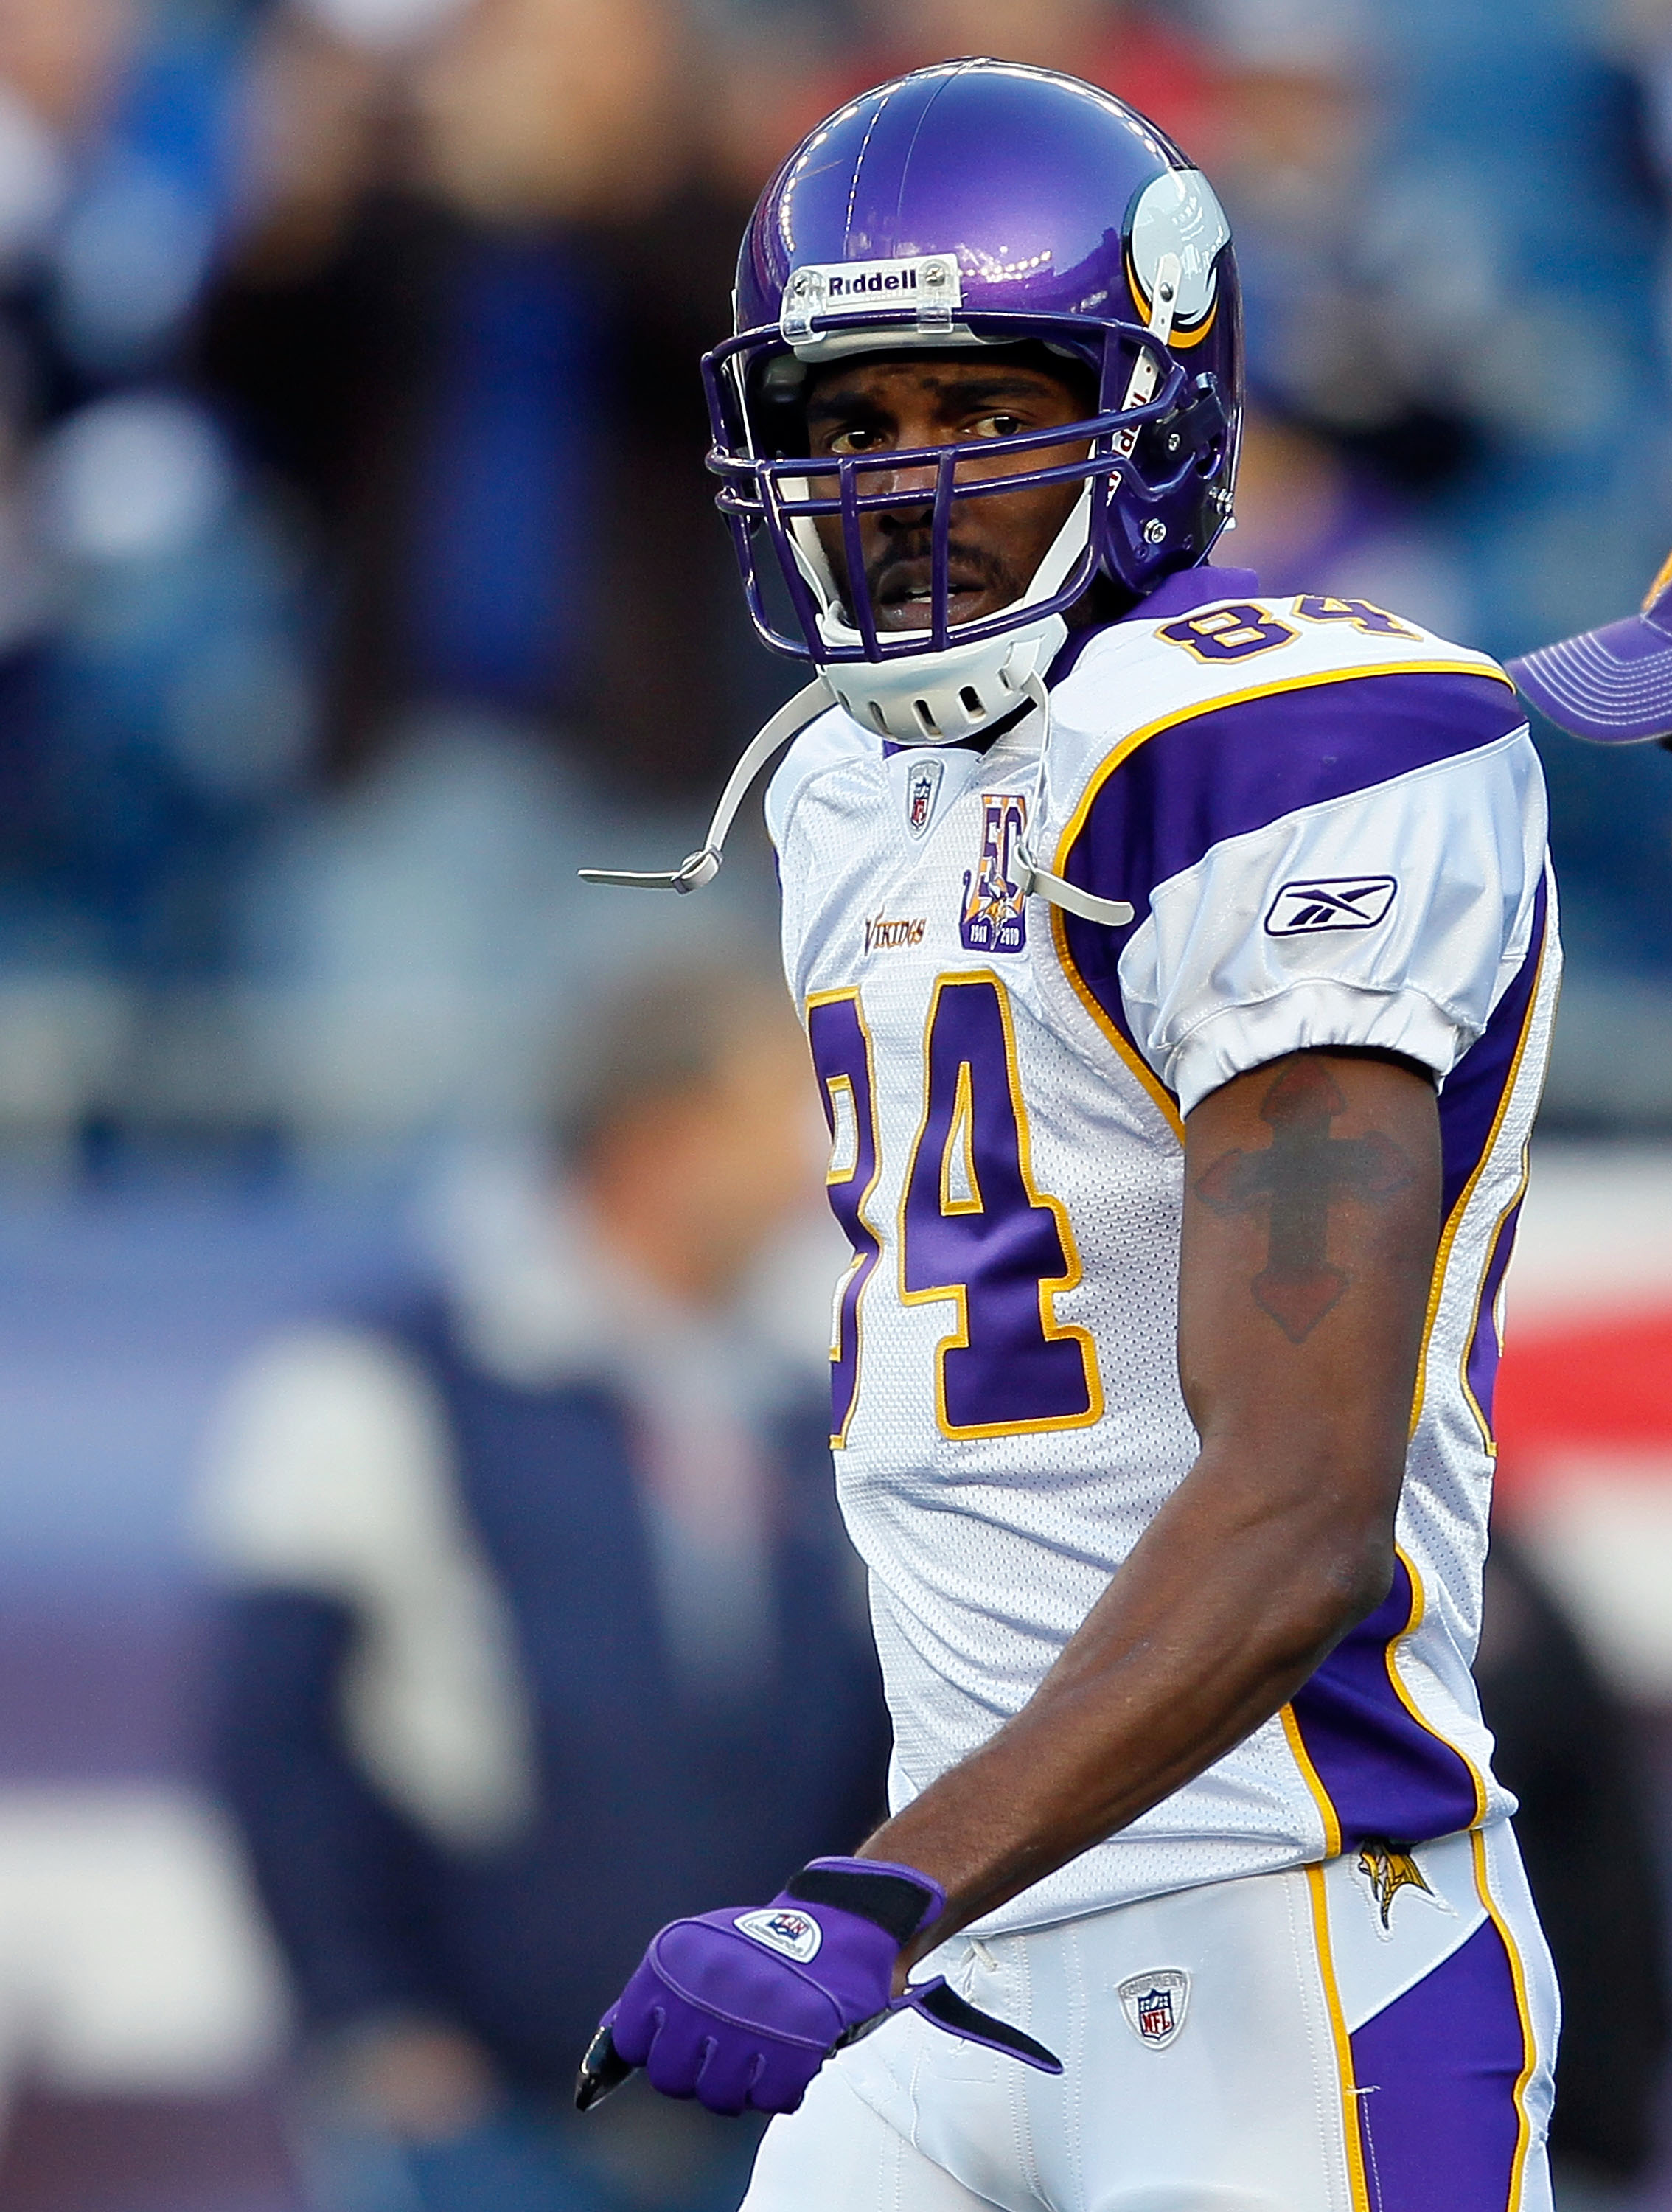 Minnesota Vikings wide receiver Randy Moss warms up before the